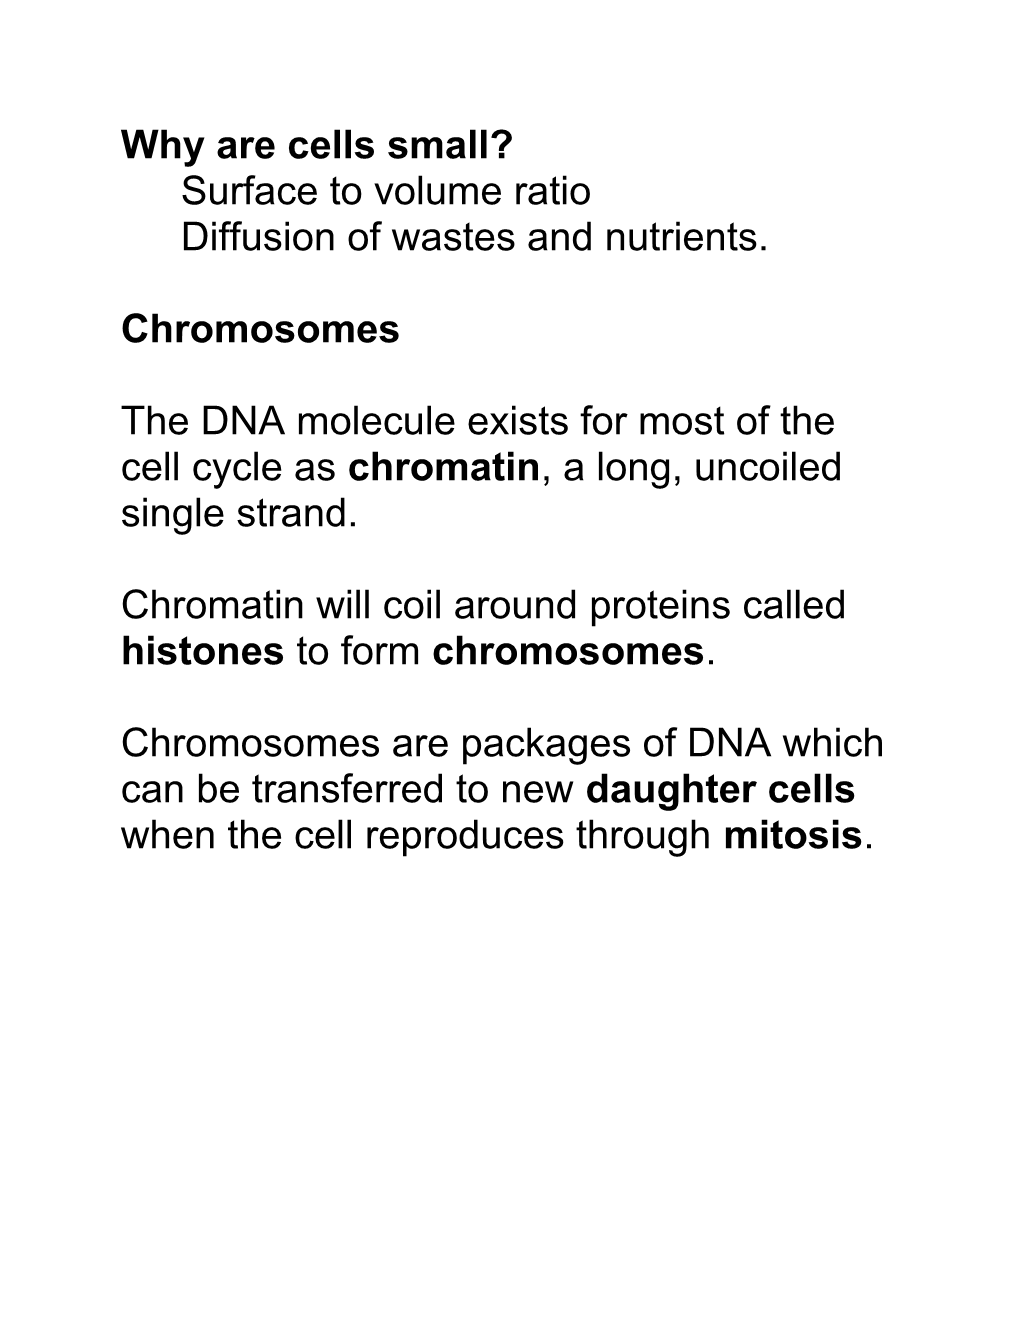 The DNA Molecule Exits for Most of the Cell Cycle As Chromatin, a Long, Uncoiled Single Strand